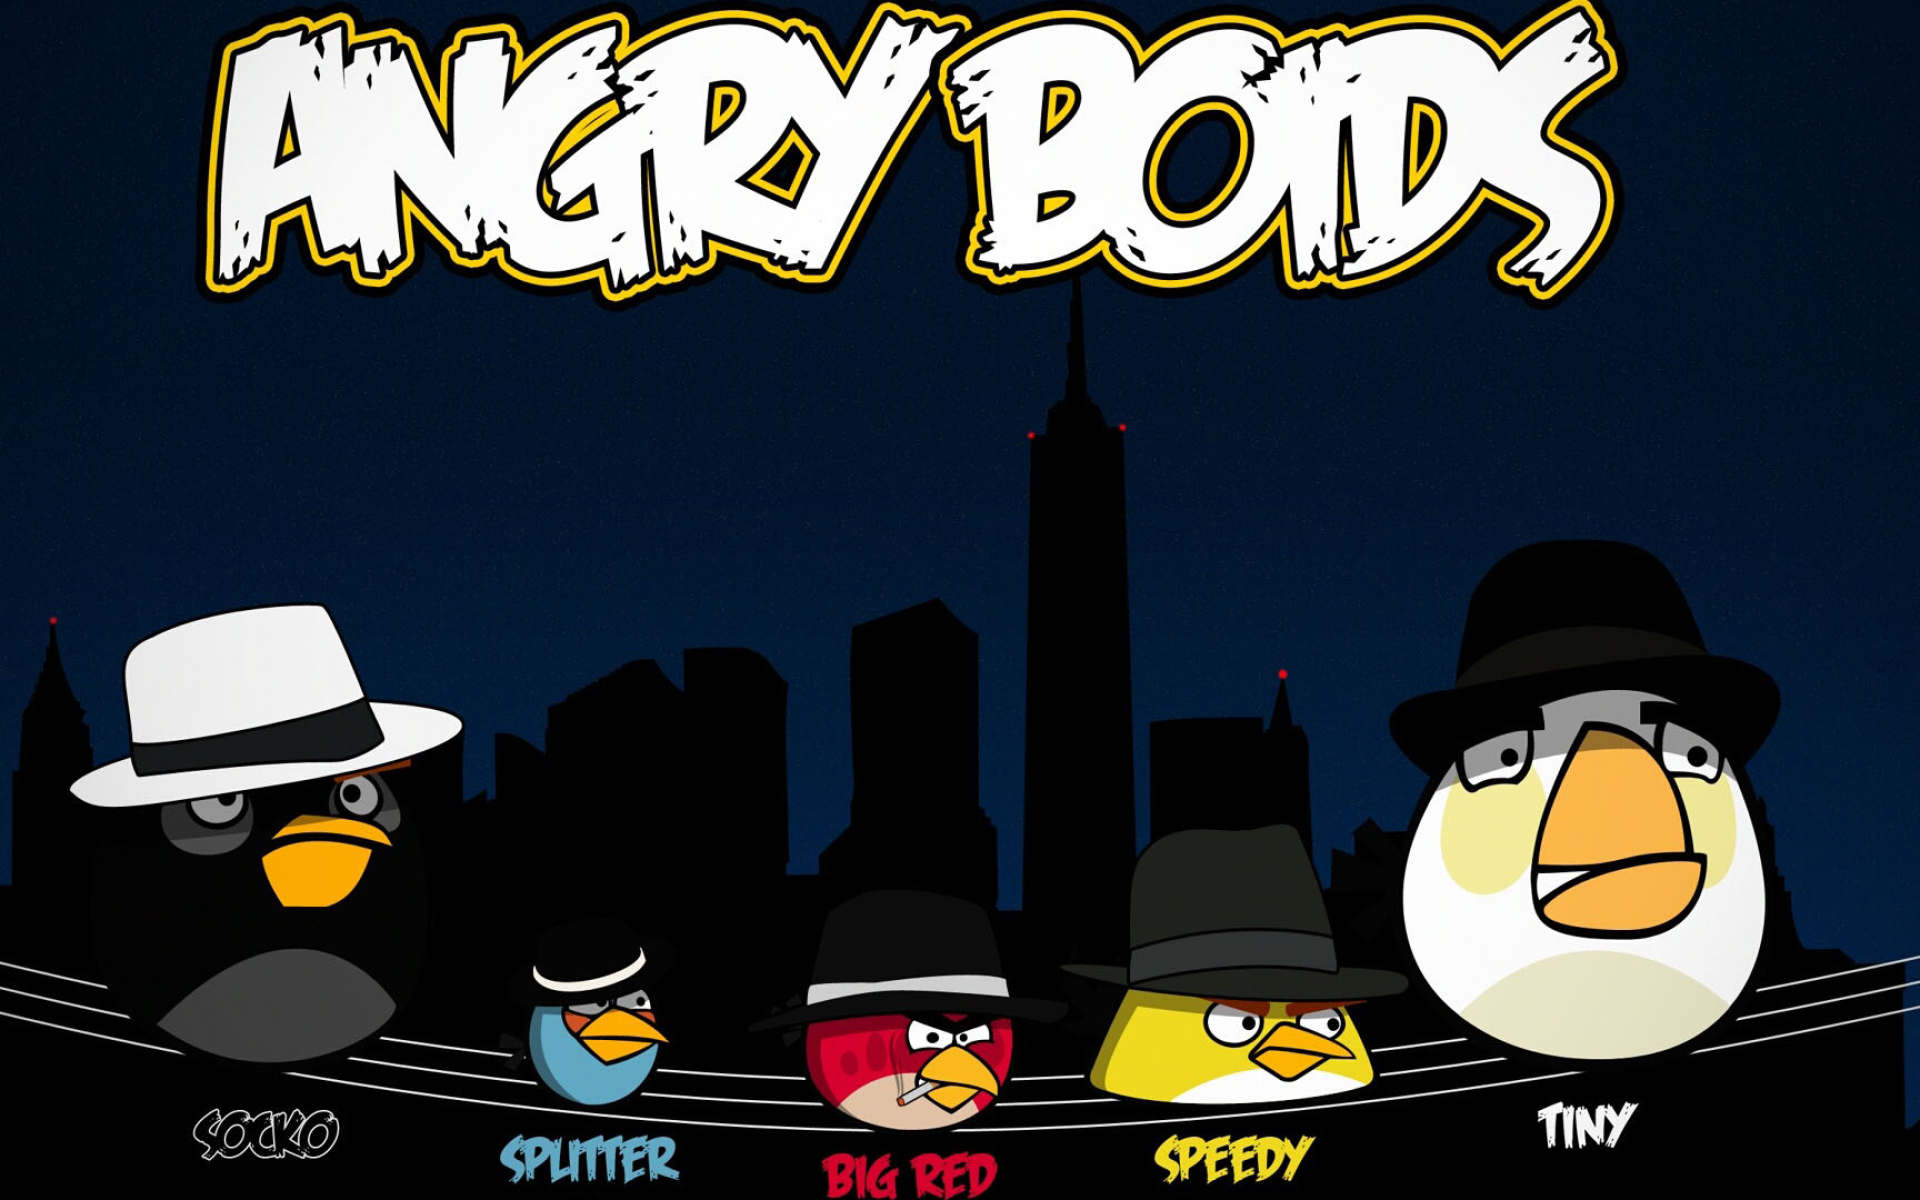 Free Angry Birds wallpaper, High definition, Windows 7 theme, Angry Bird characters, 1920x1200 HD Desktop